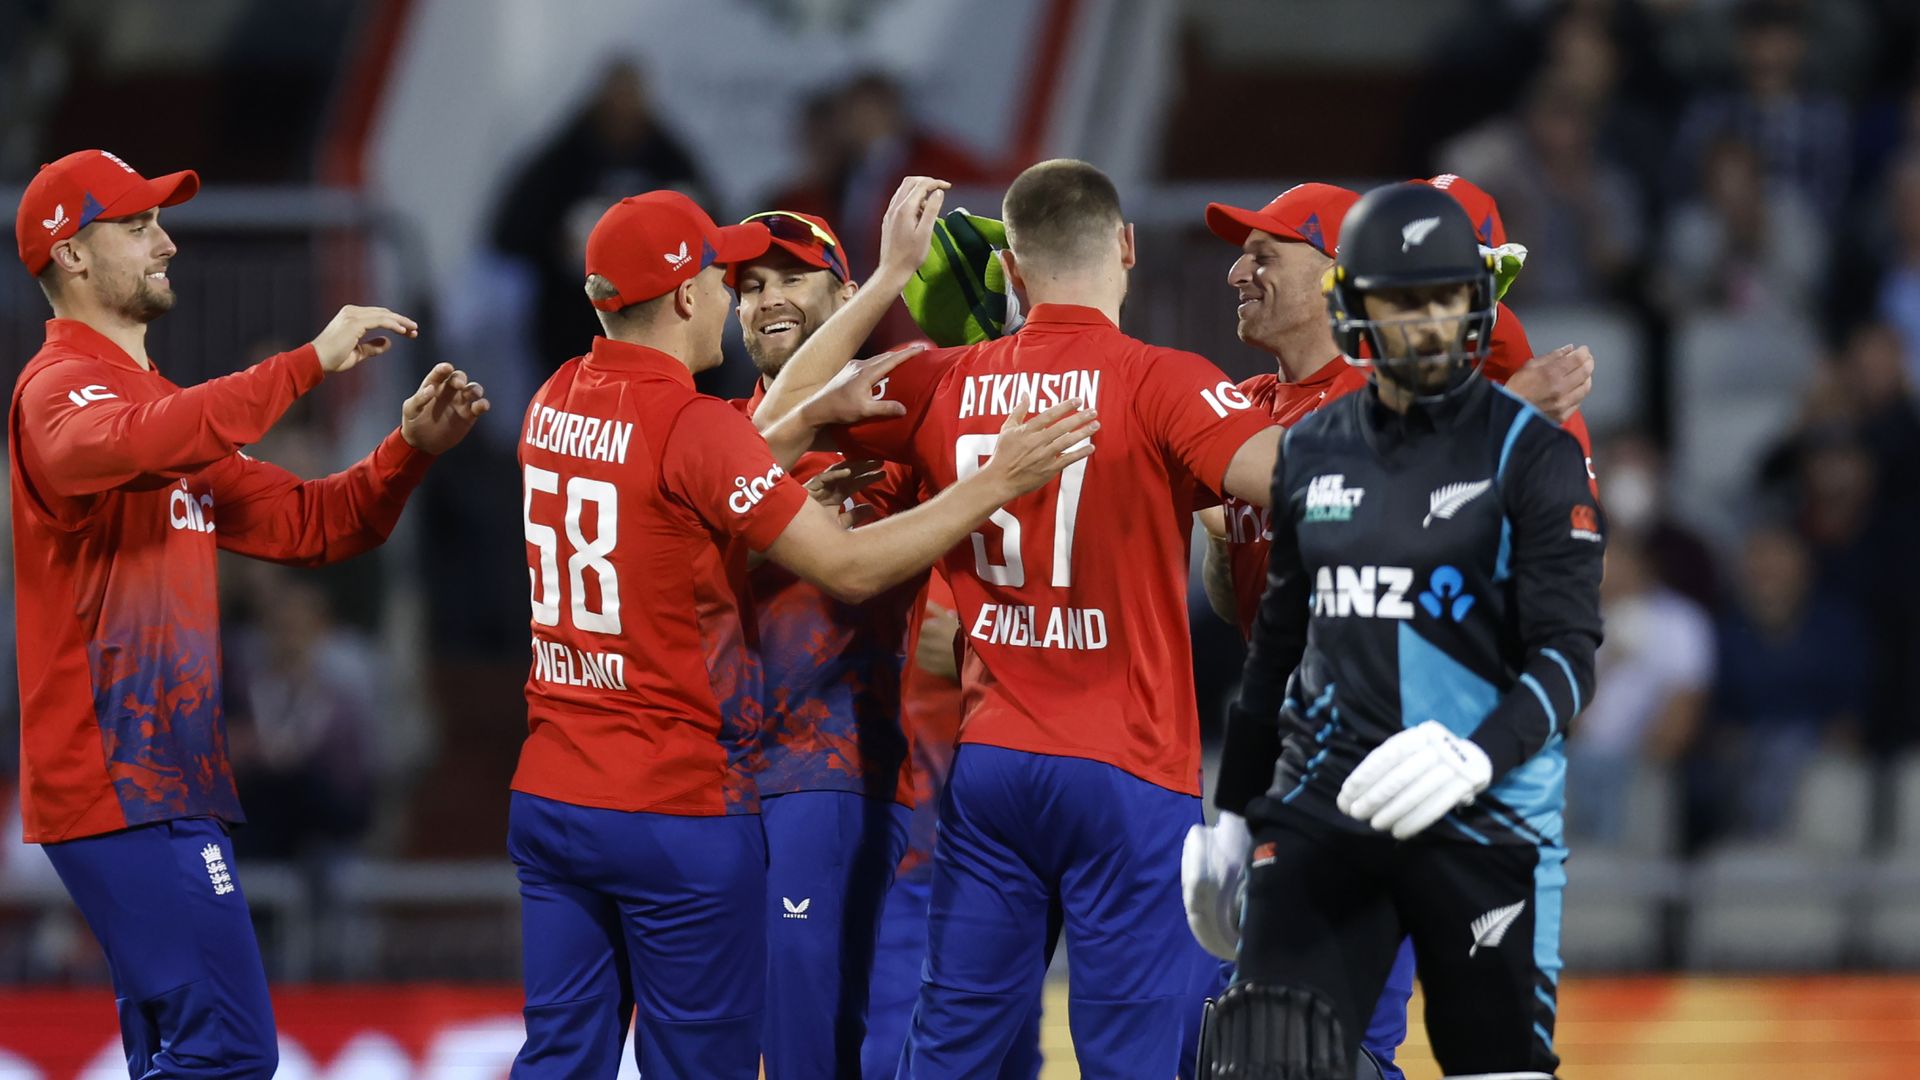 England hammer New Zealand by 95 runs - as it happened in Manchester